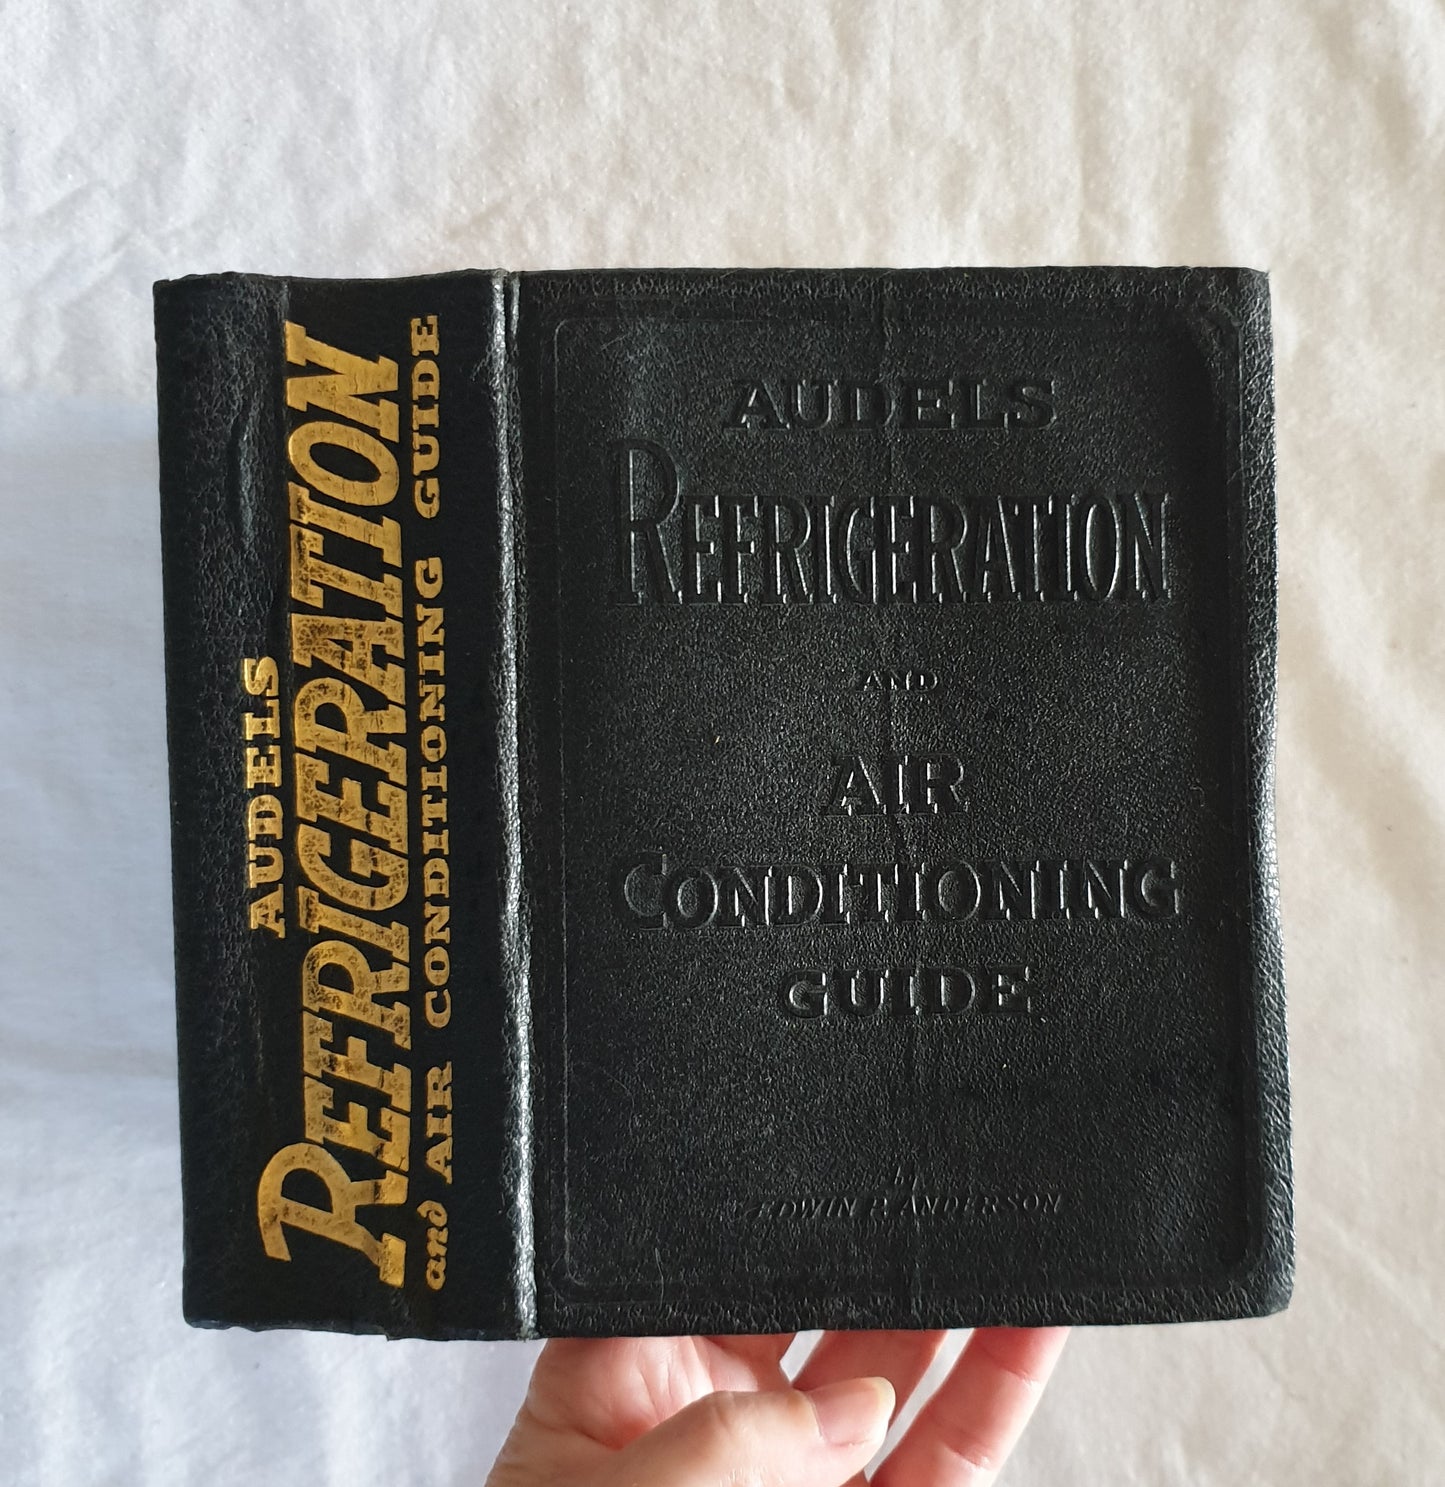 Audels Refrigeration and Air Conditioning Guide by Edwin P. Anderson